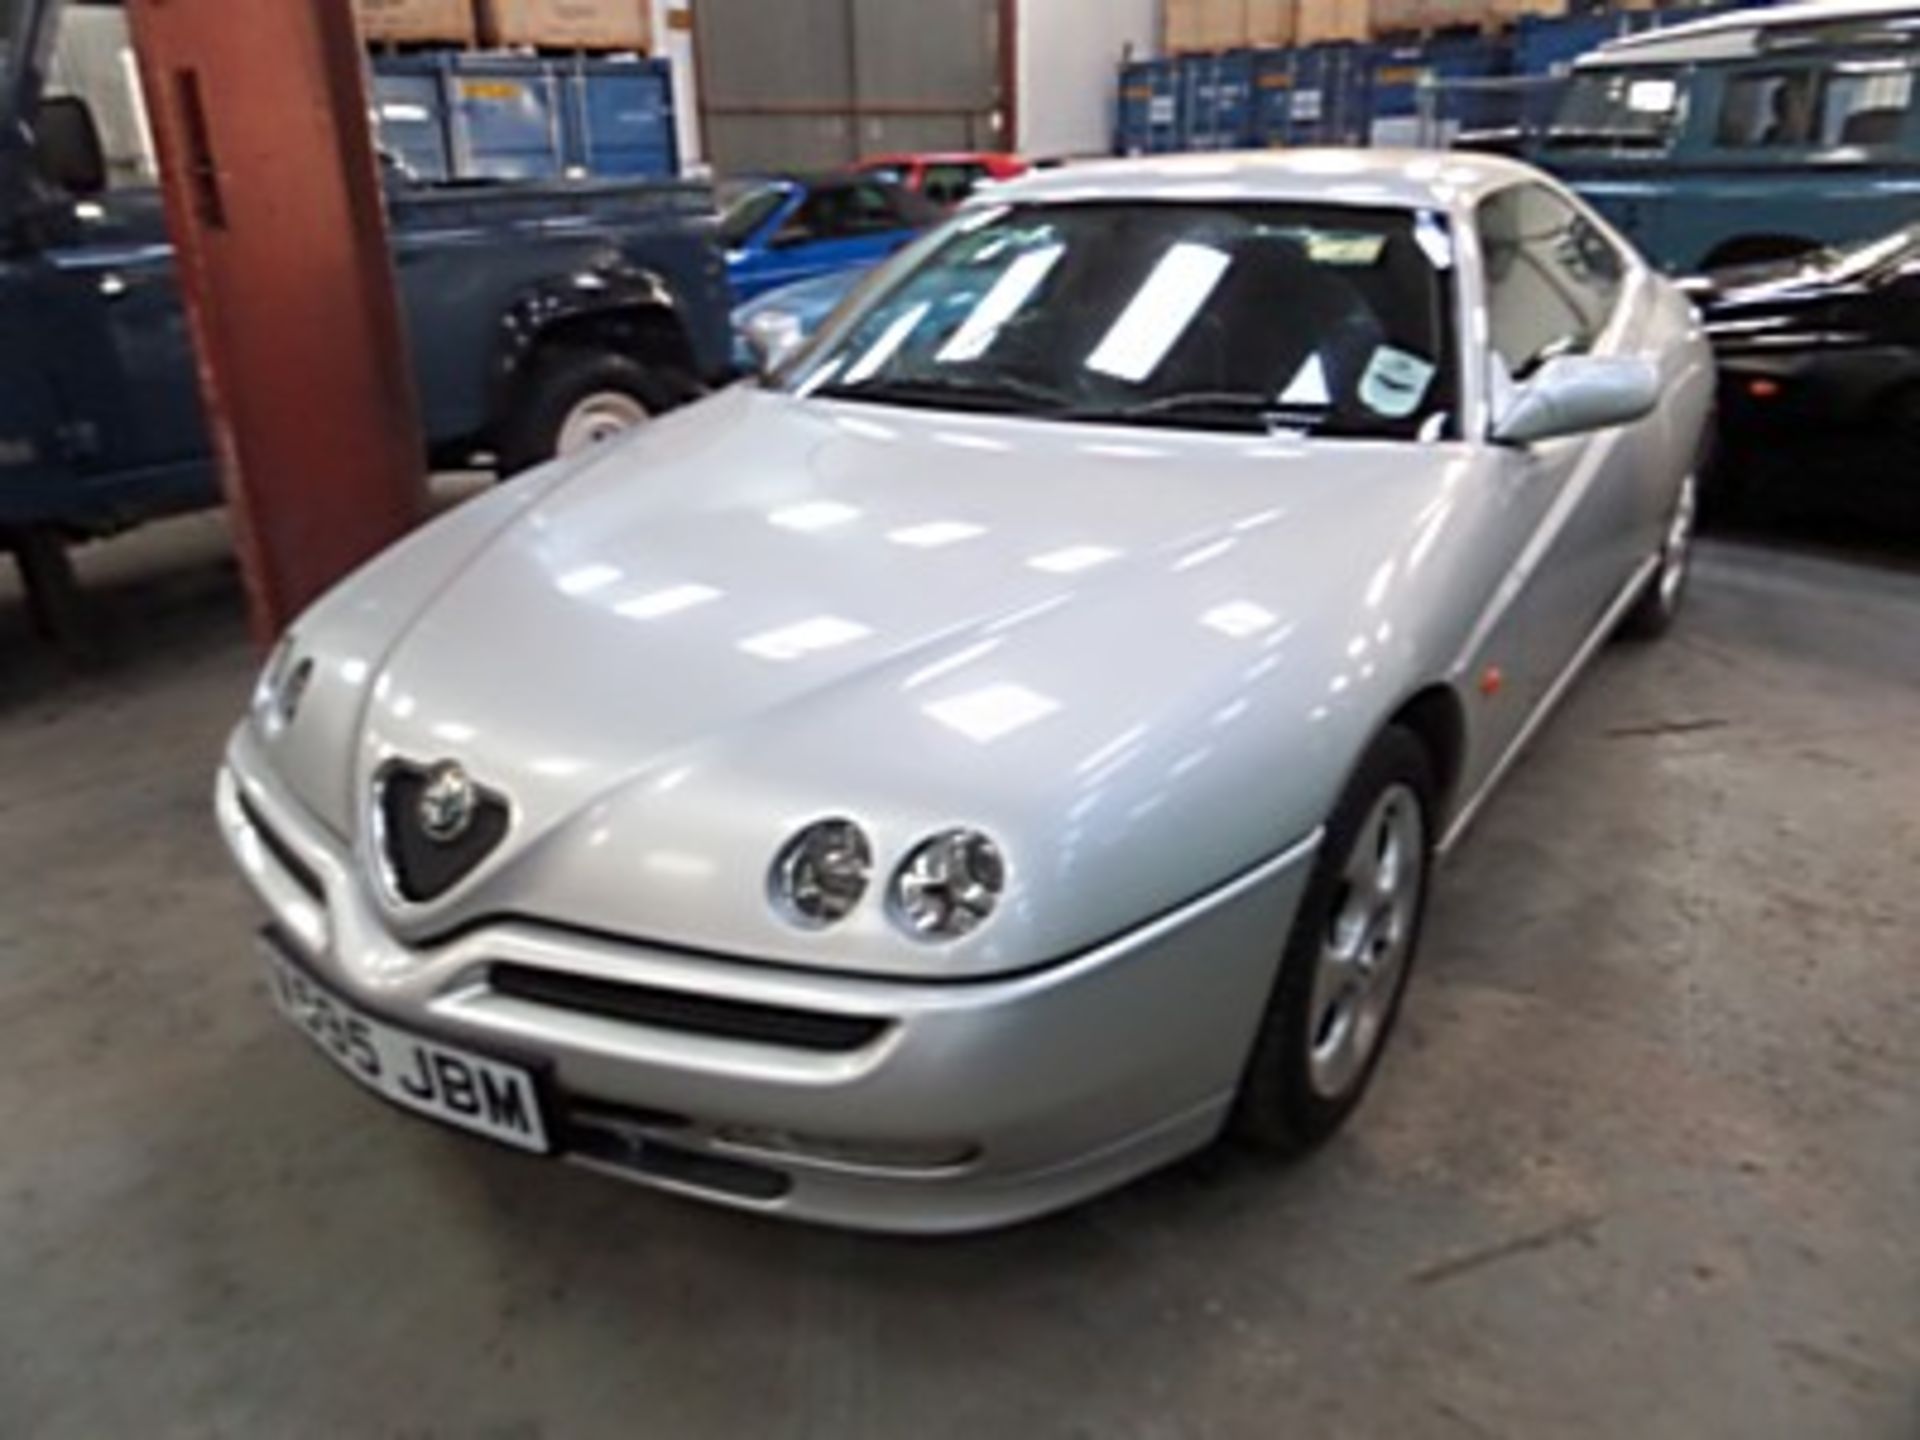 ALFA ROMEO Chassis number ZAR91600006057837 - the vendor has owned this example for over seven - Image 13 of 13